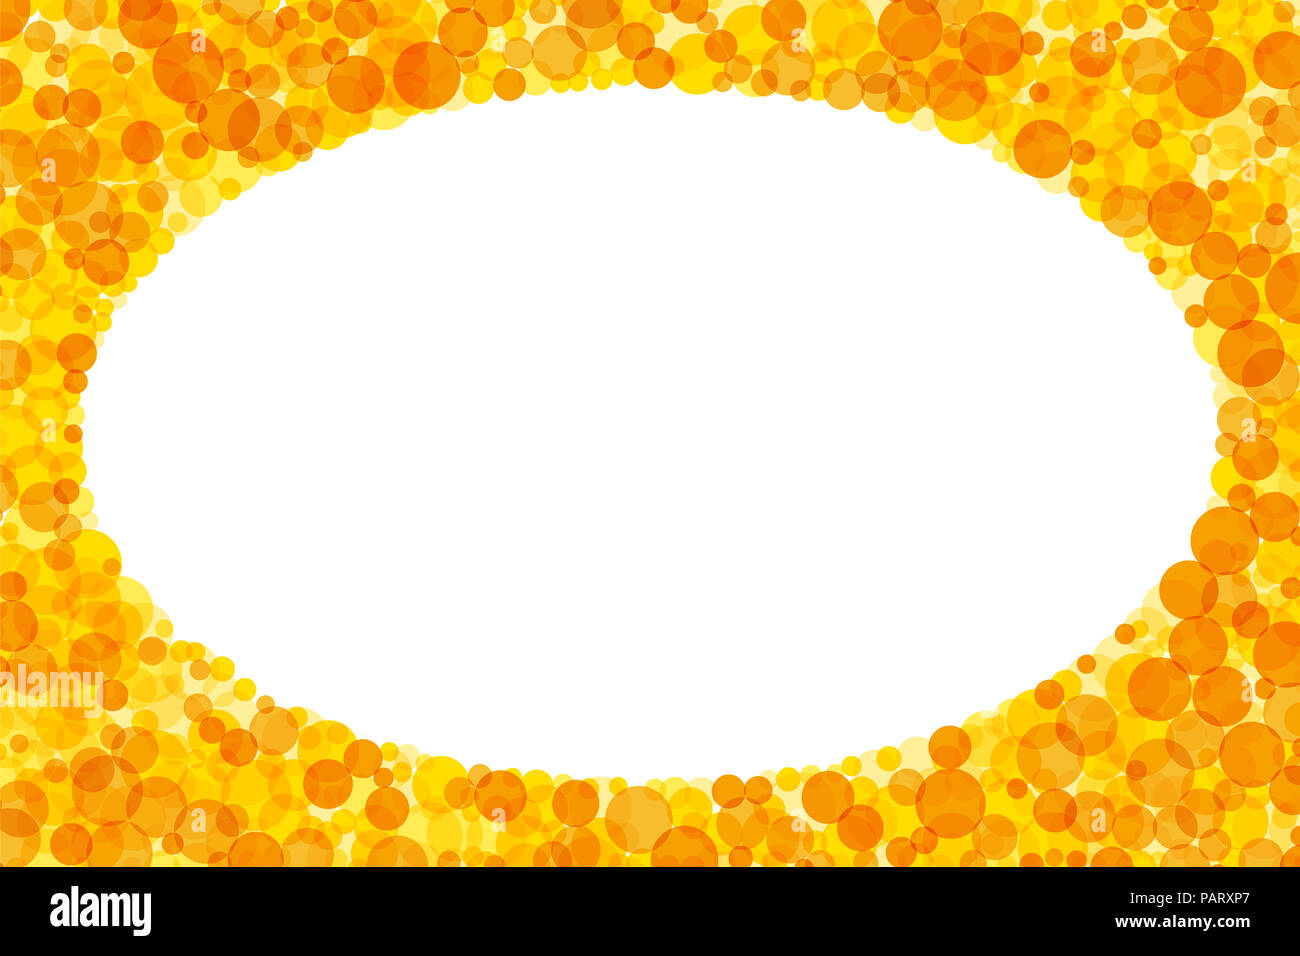 Oval frame and background made of yellow and orange dots. Bright translucent spots forming a rectangle frame with a white elliptical space inside. Stock Photo